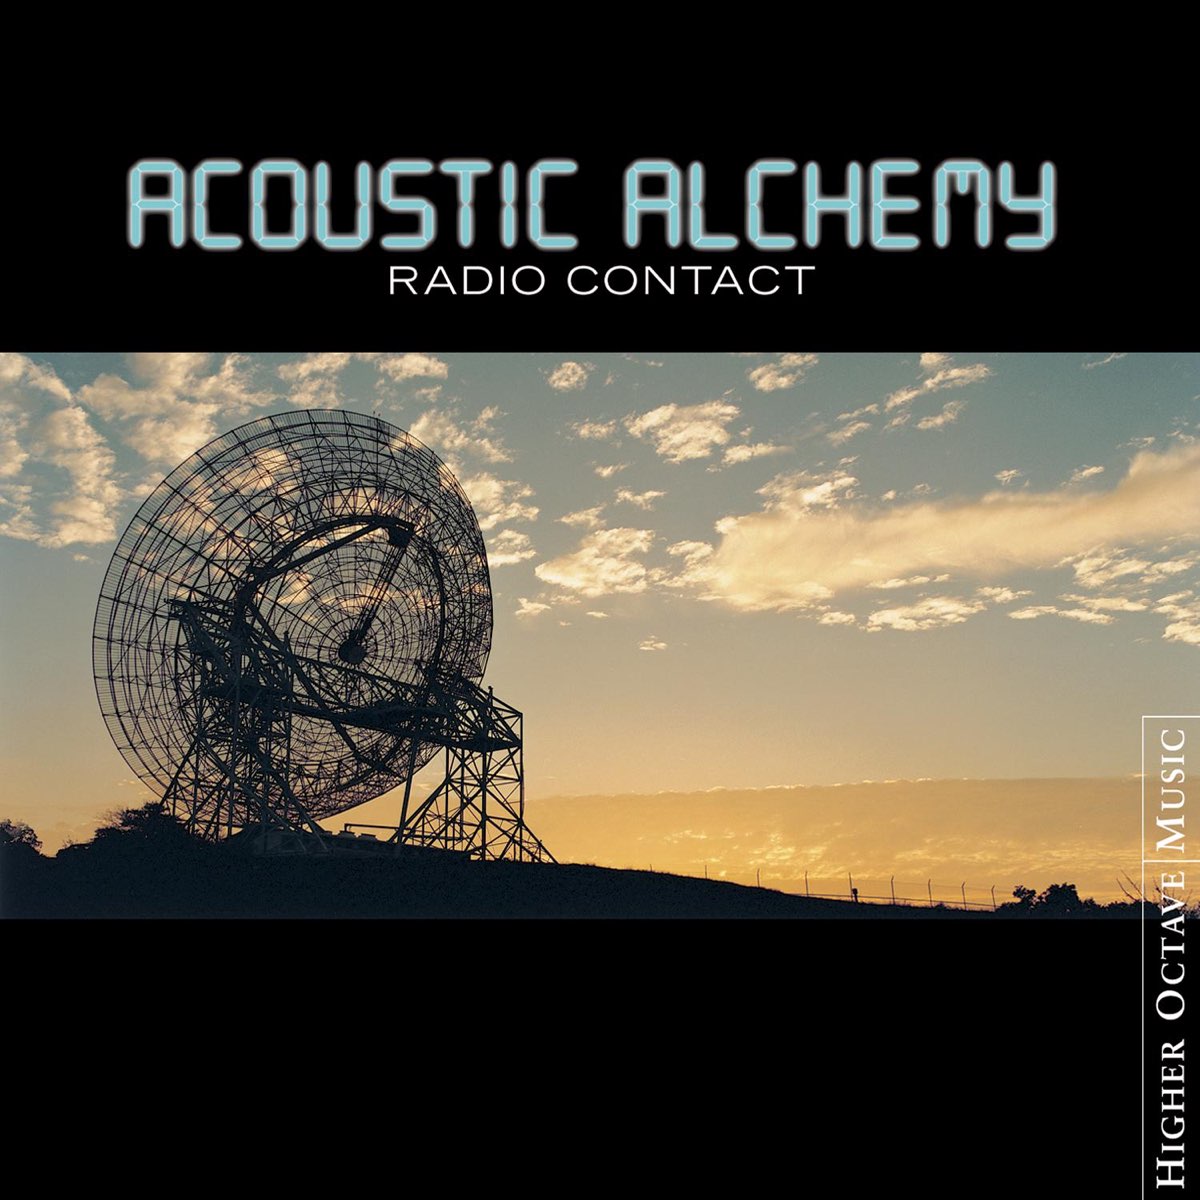 Radio Contact - Album by Acoustic Alchemy - Apple Music